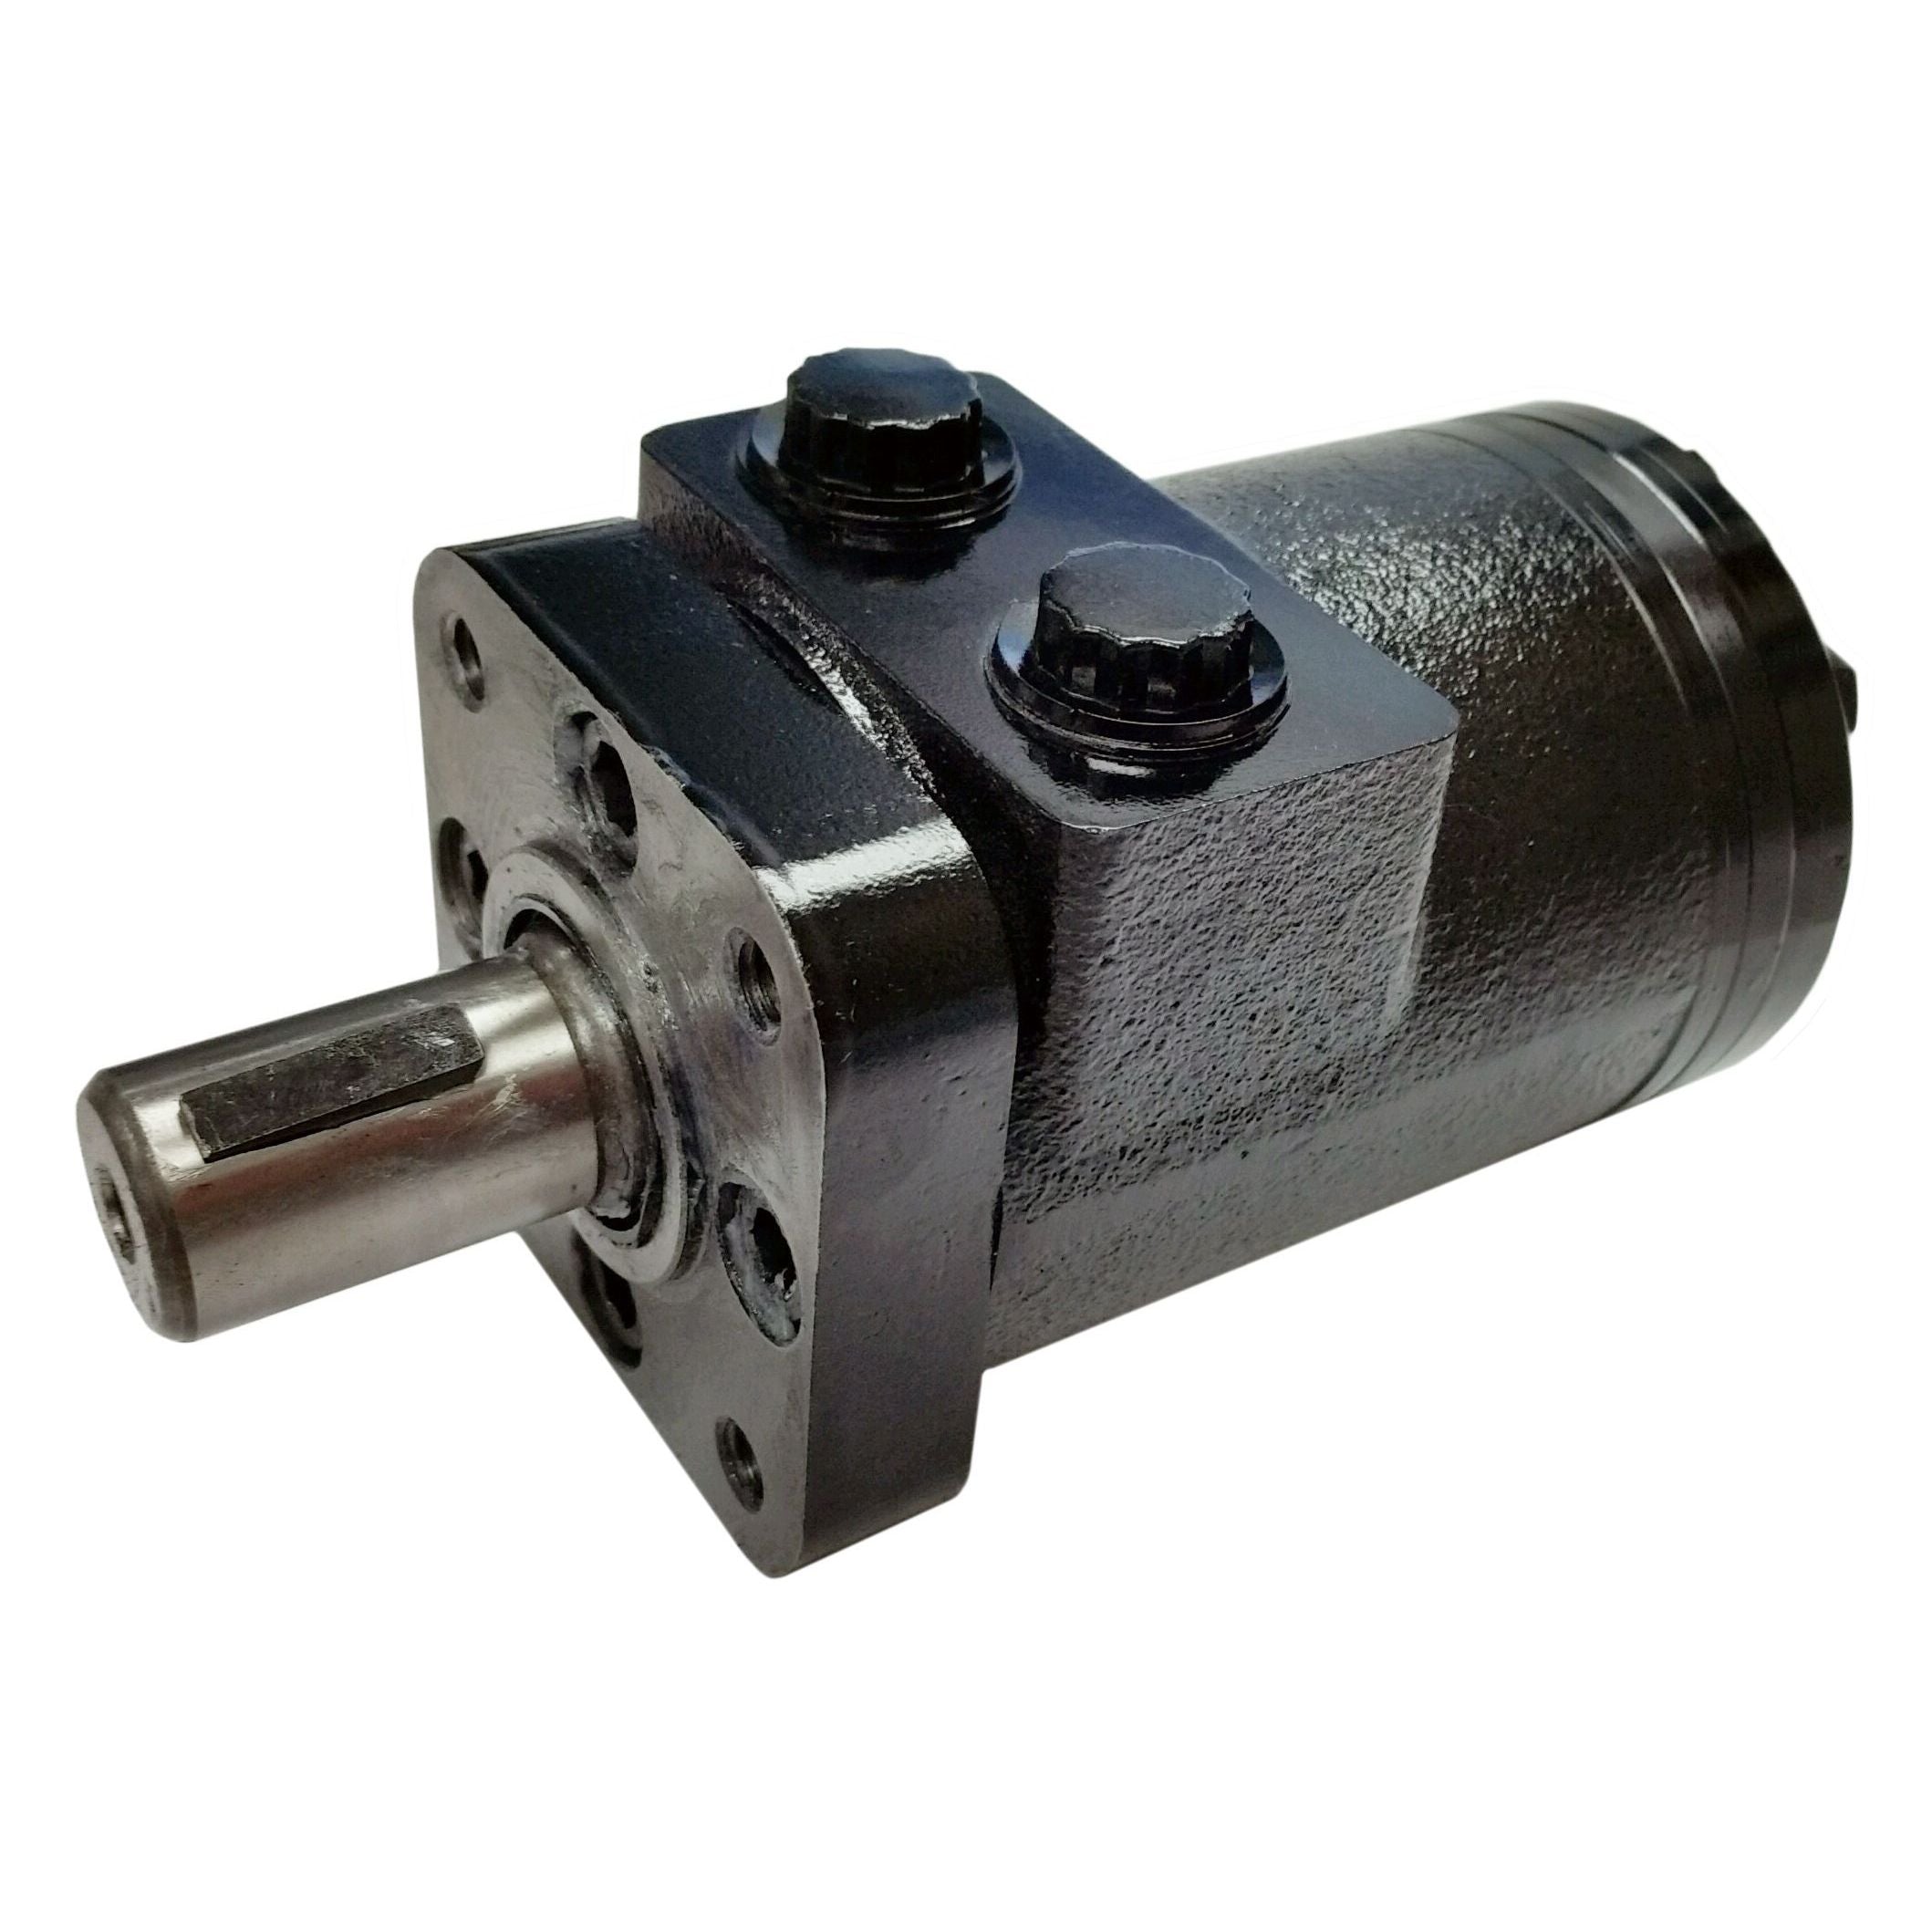 BMPH-50-H4-K-S : Dynamic LSHT Motor, 51.7cc, 1150RPM, 885in-lb, 2031psi Differential, 15.85GPM, SAE A 4-Bolt Mount, 1" Bore x 1/4" Key Shaft, Side Ported, #10 SAE (5/8")